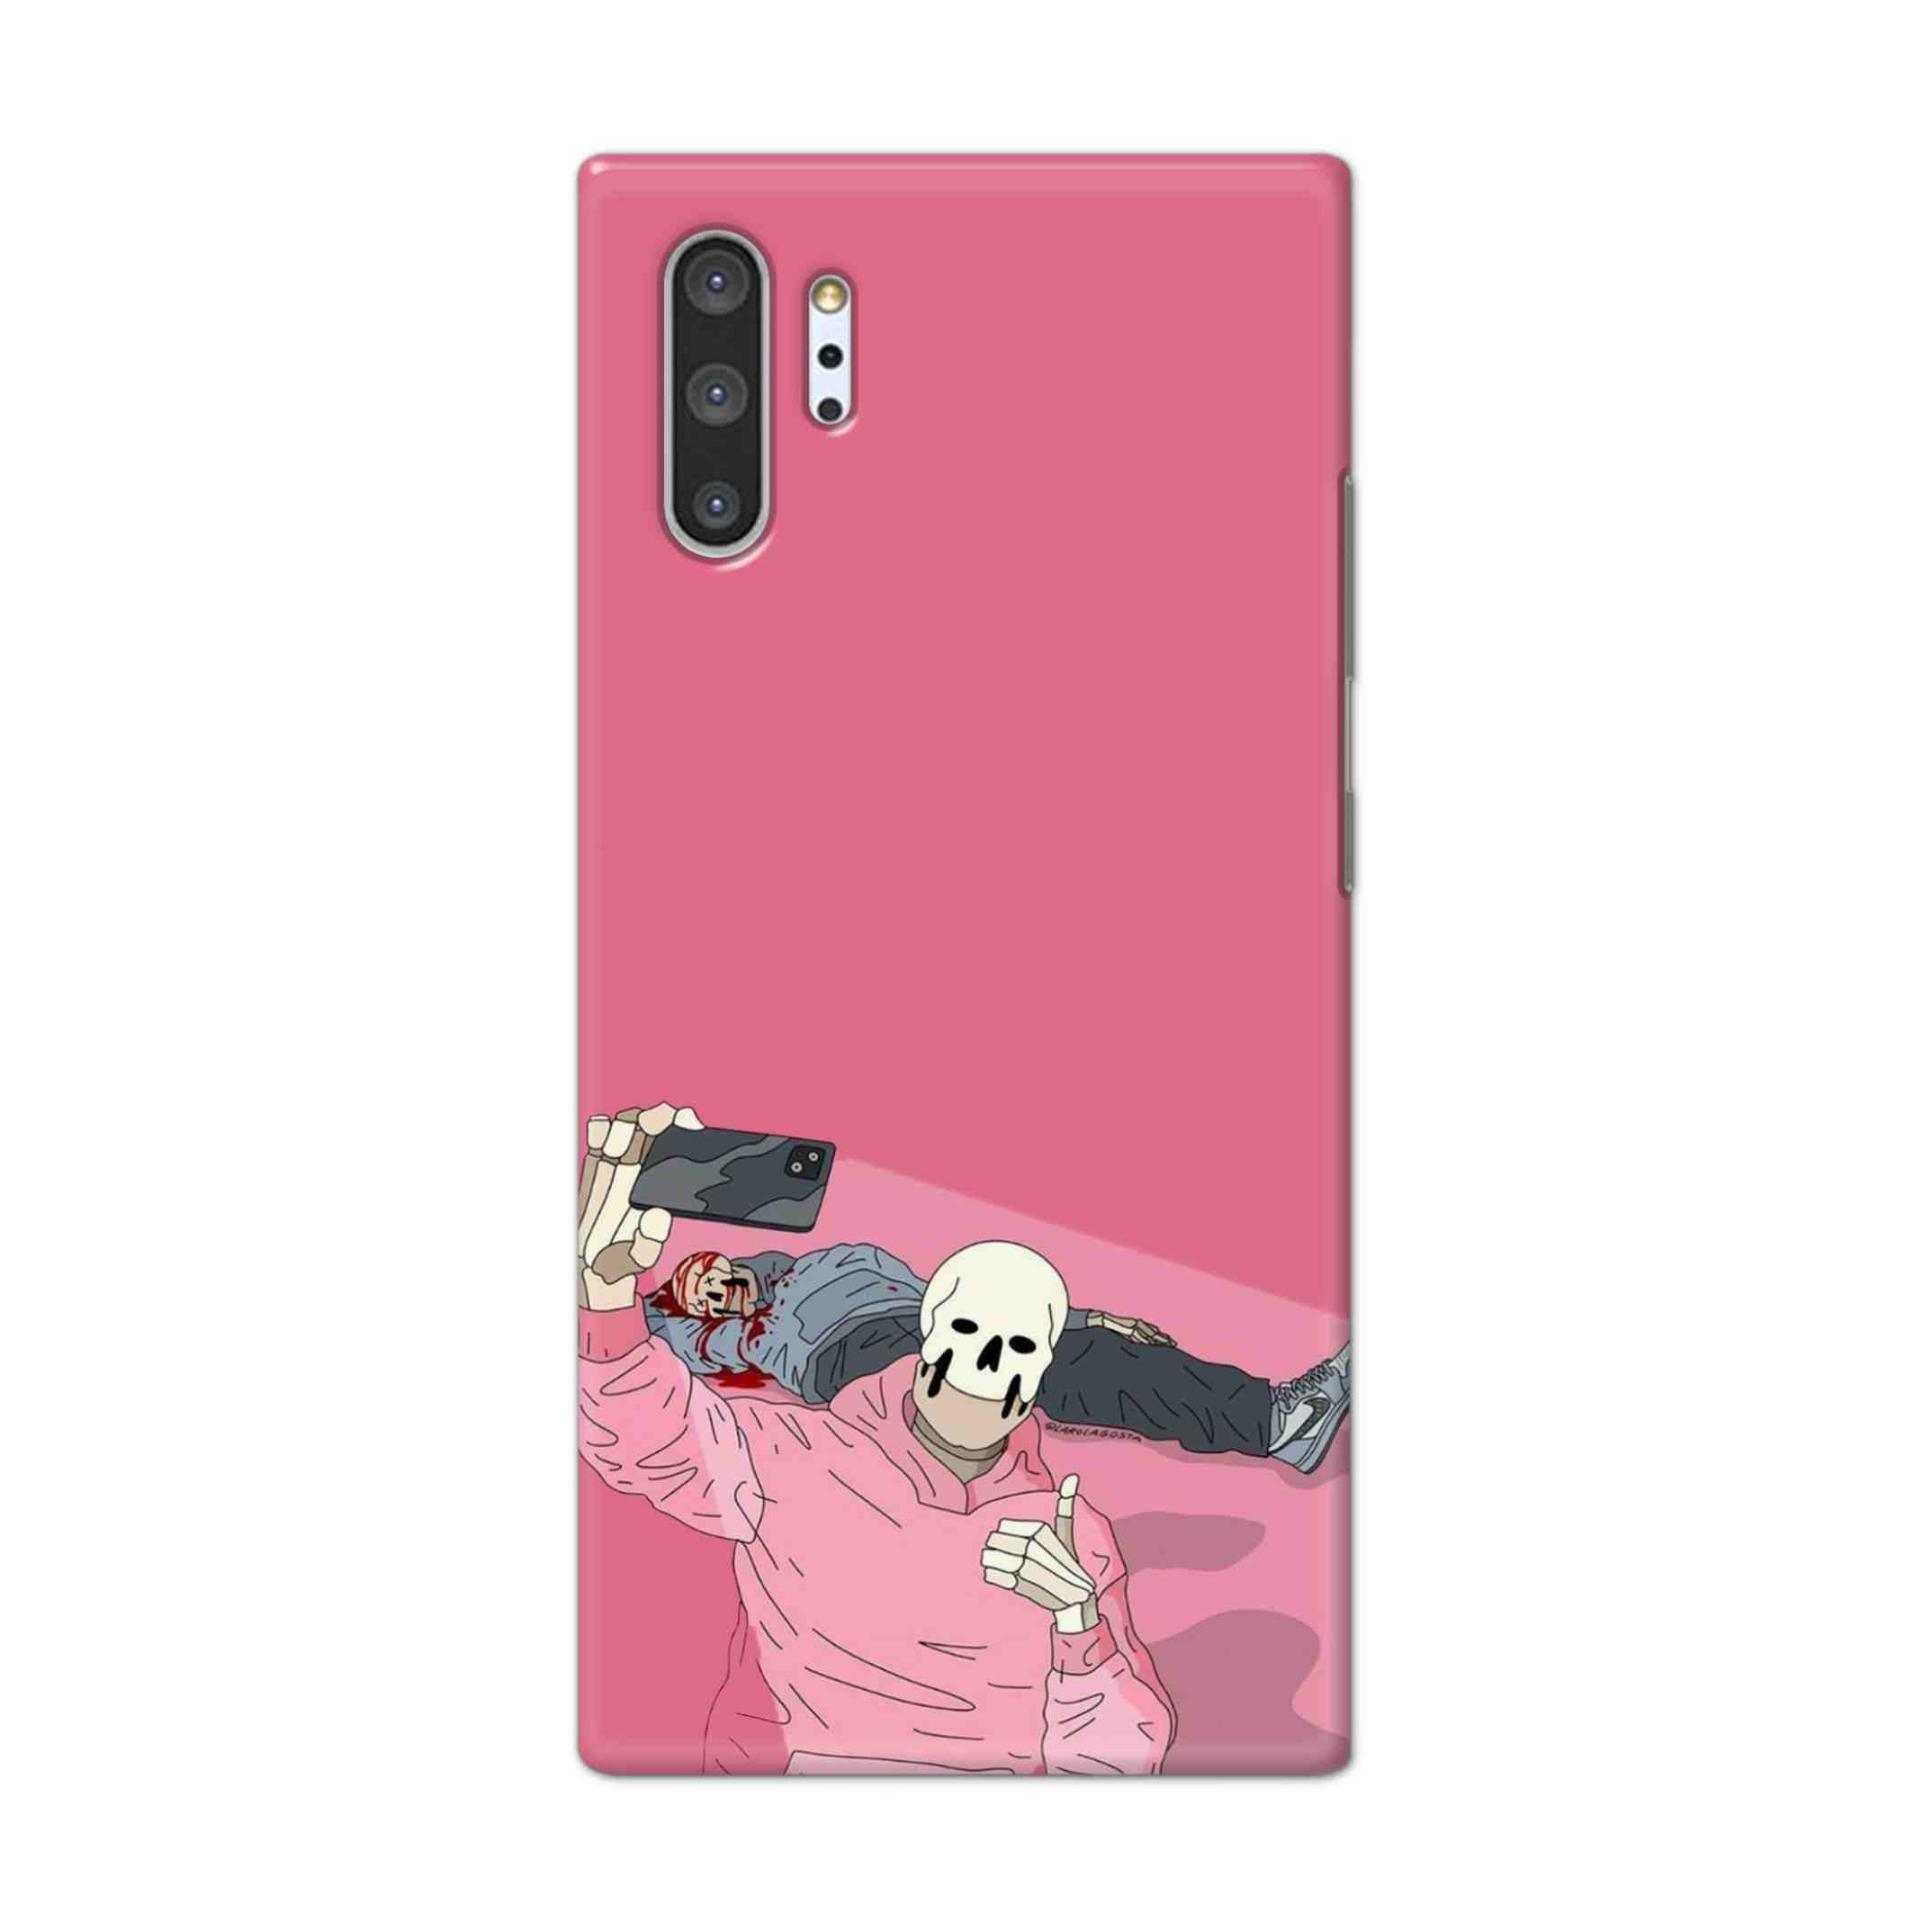 Buy Selfie Hard Back Mobile Phone Case Cover For Samsung Galaxy Note 10 Pro Online